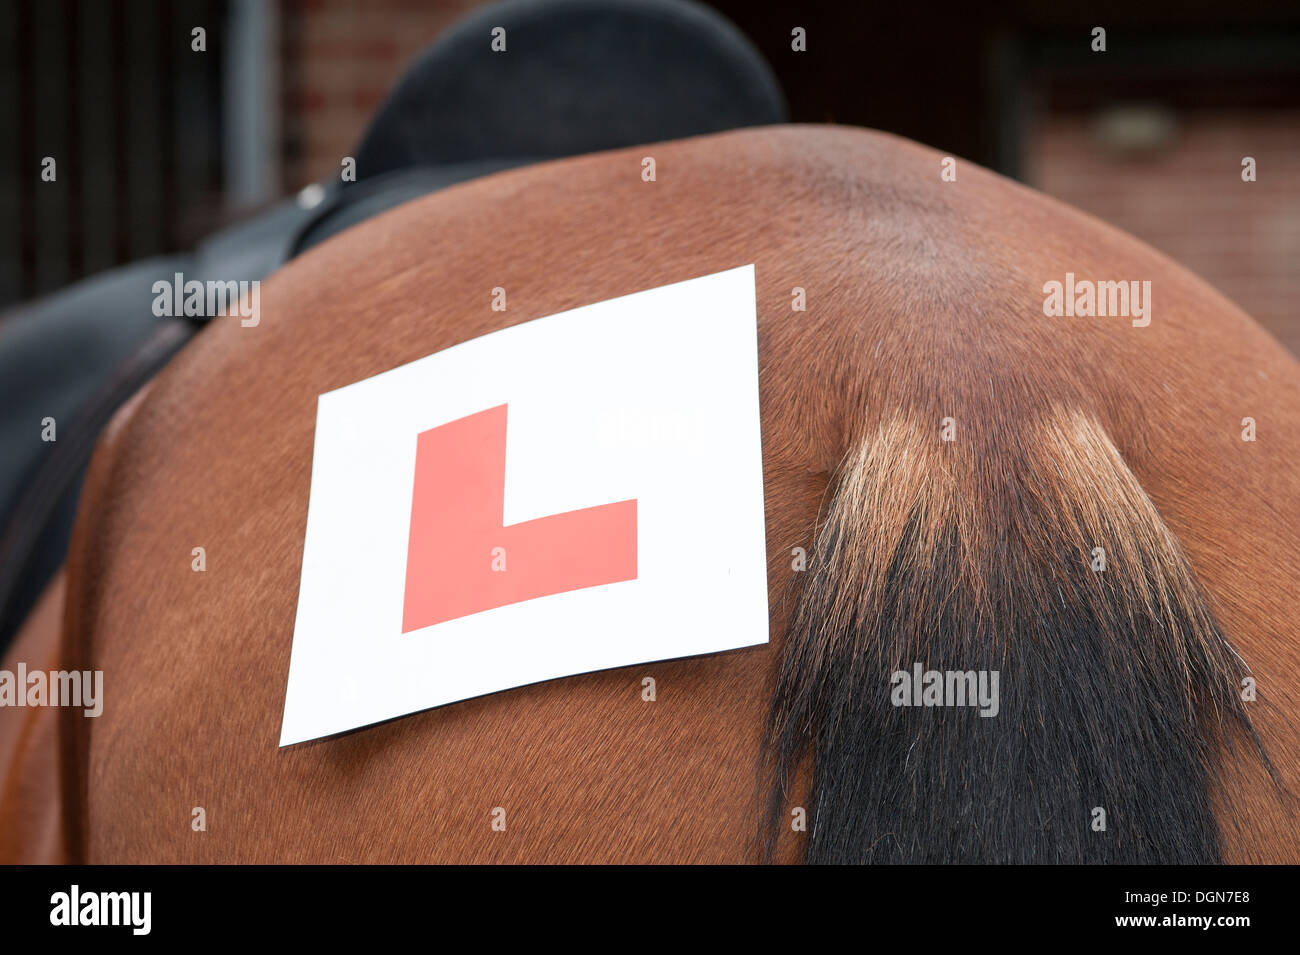 Learning to ride L plate on the rump of a horse Stock Photo